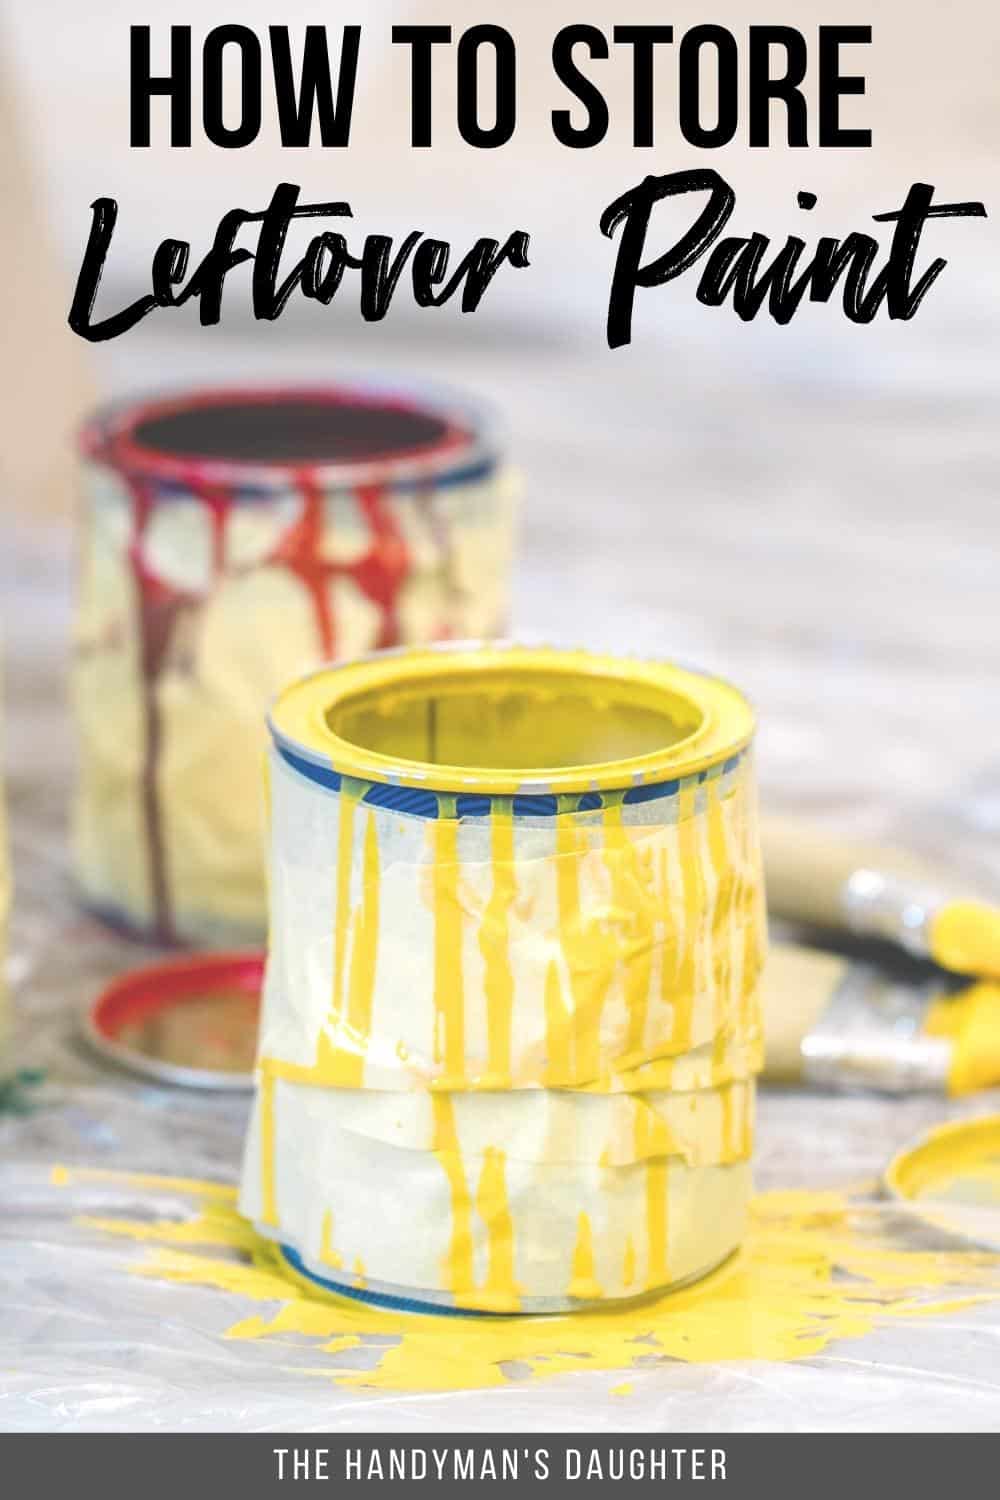 how to store leftover paint with image of yellow and red paint in can dripping over edge